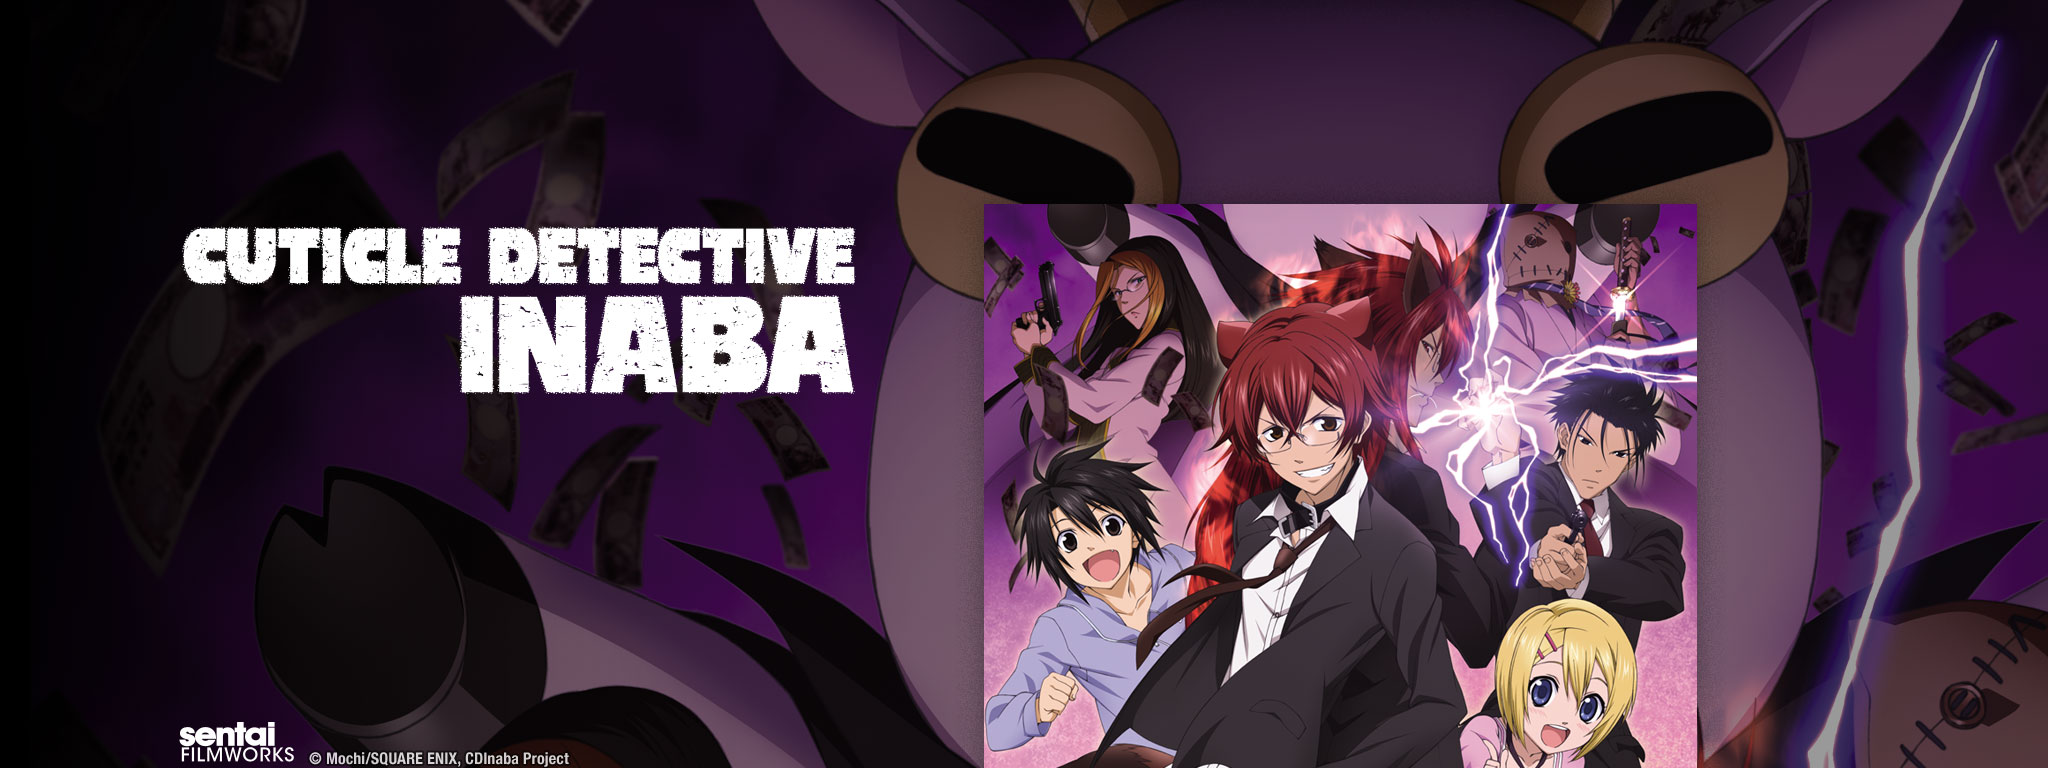 Title Art for Cuticle Detective Inaba